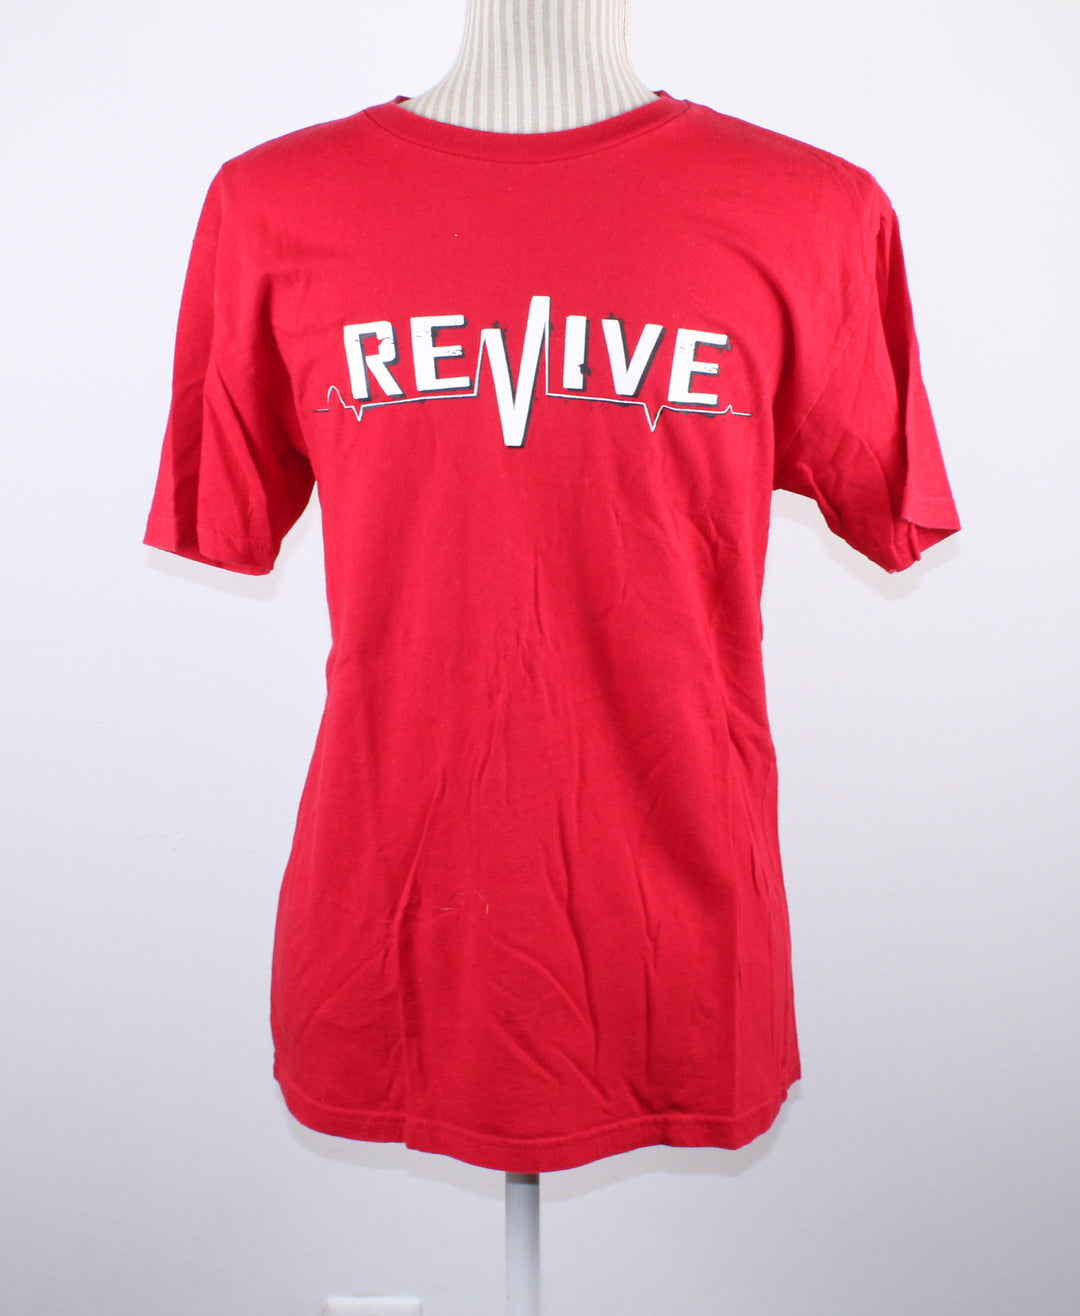 REVIVE RED TEE ADULT SMALL EUC